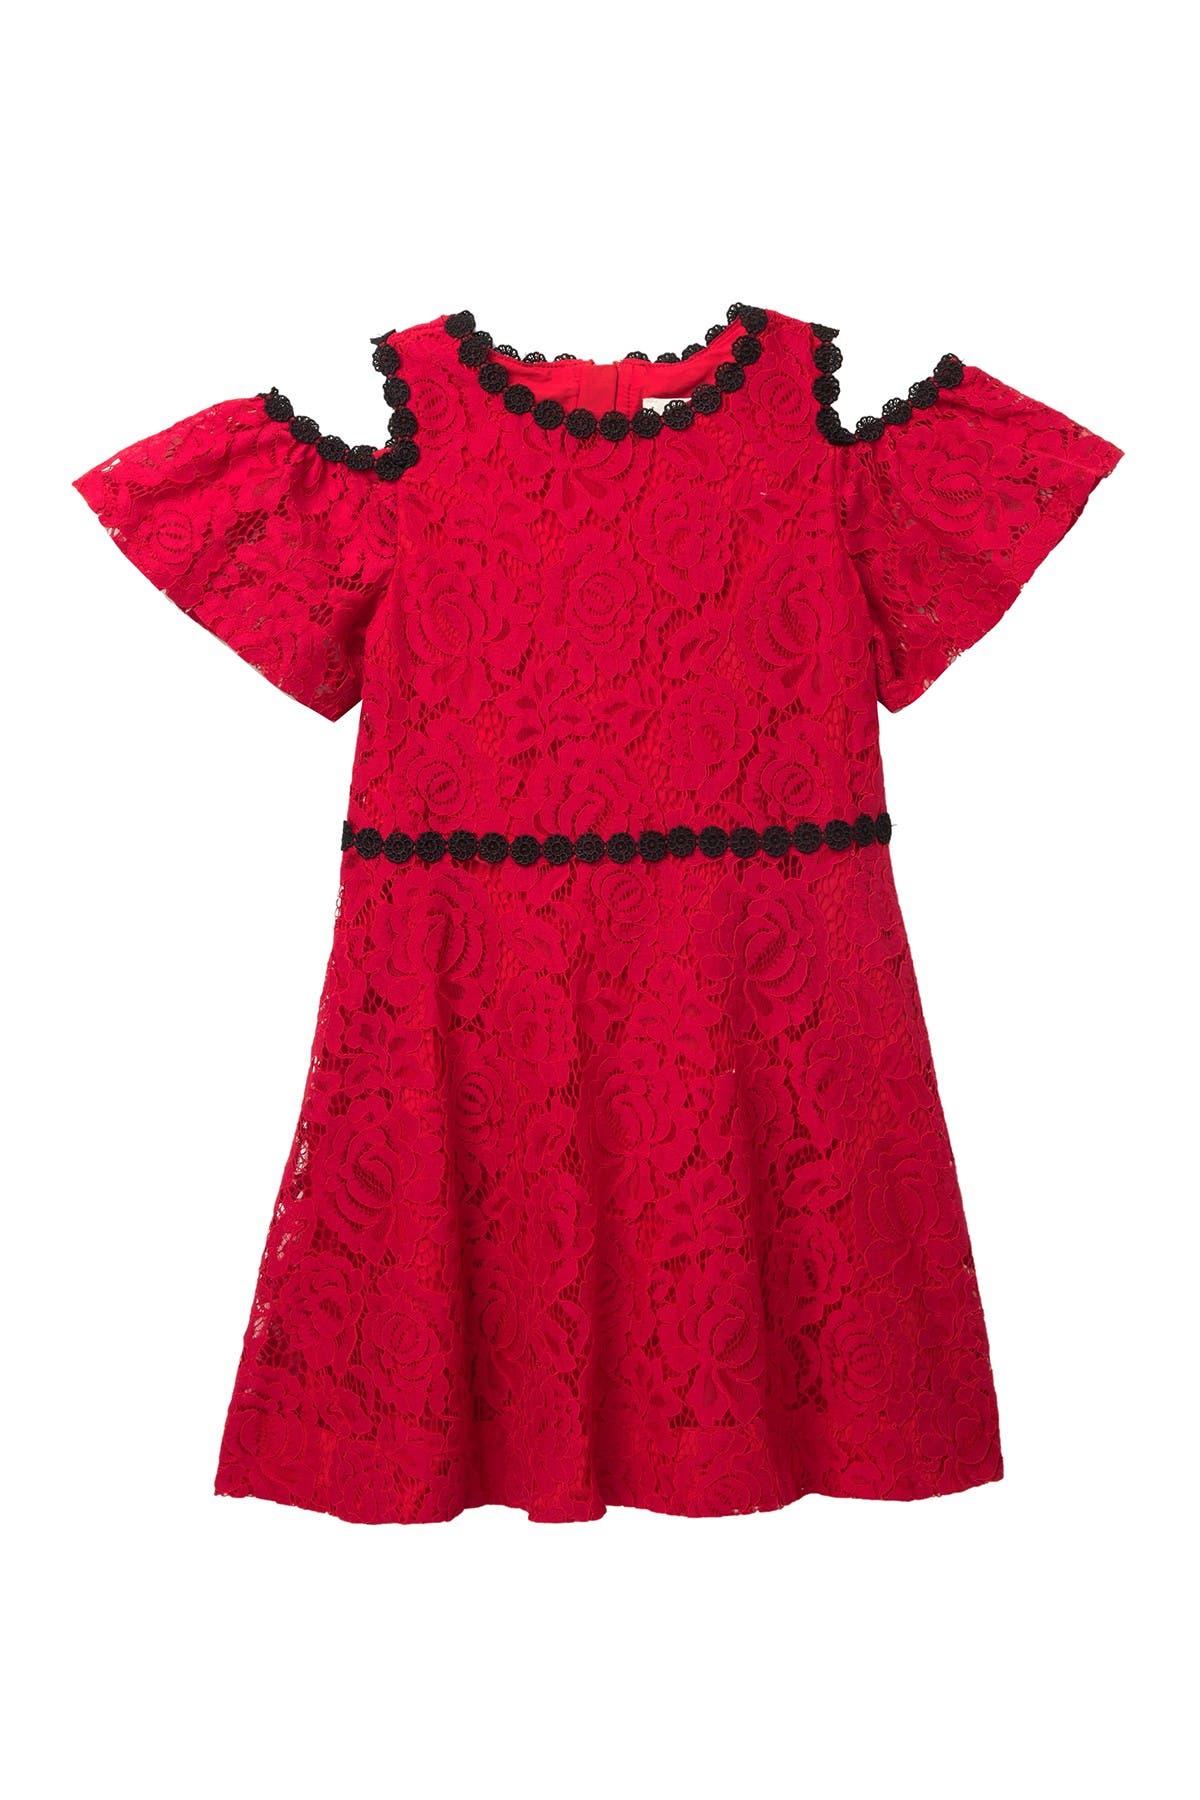 kate spade red lace dress